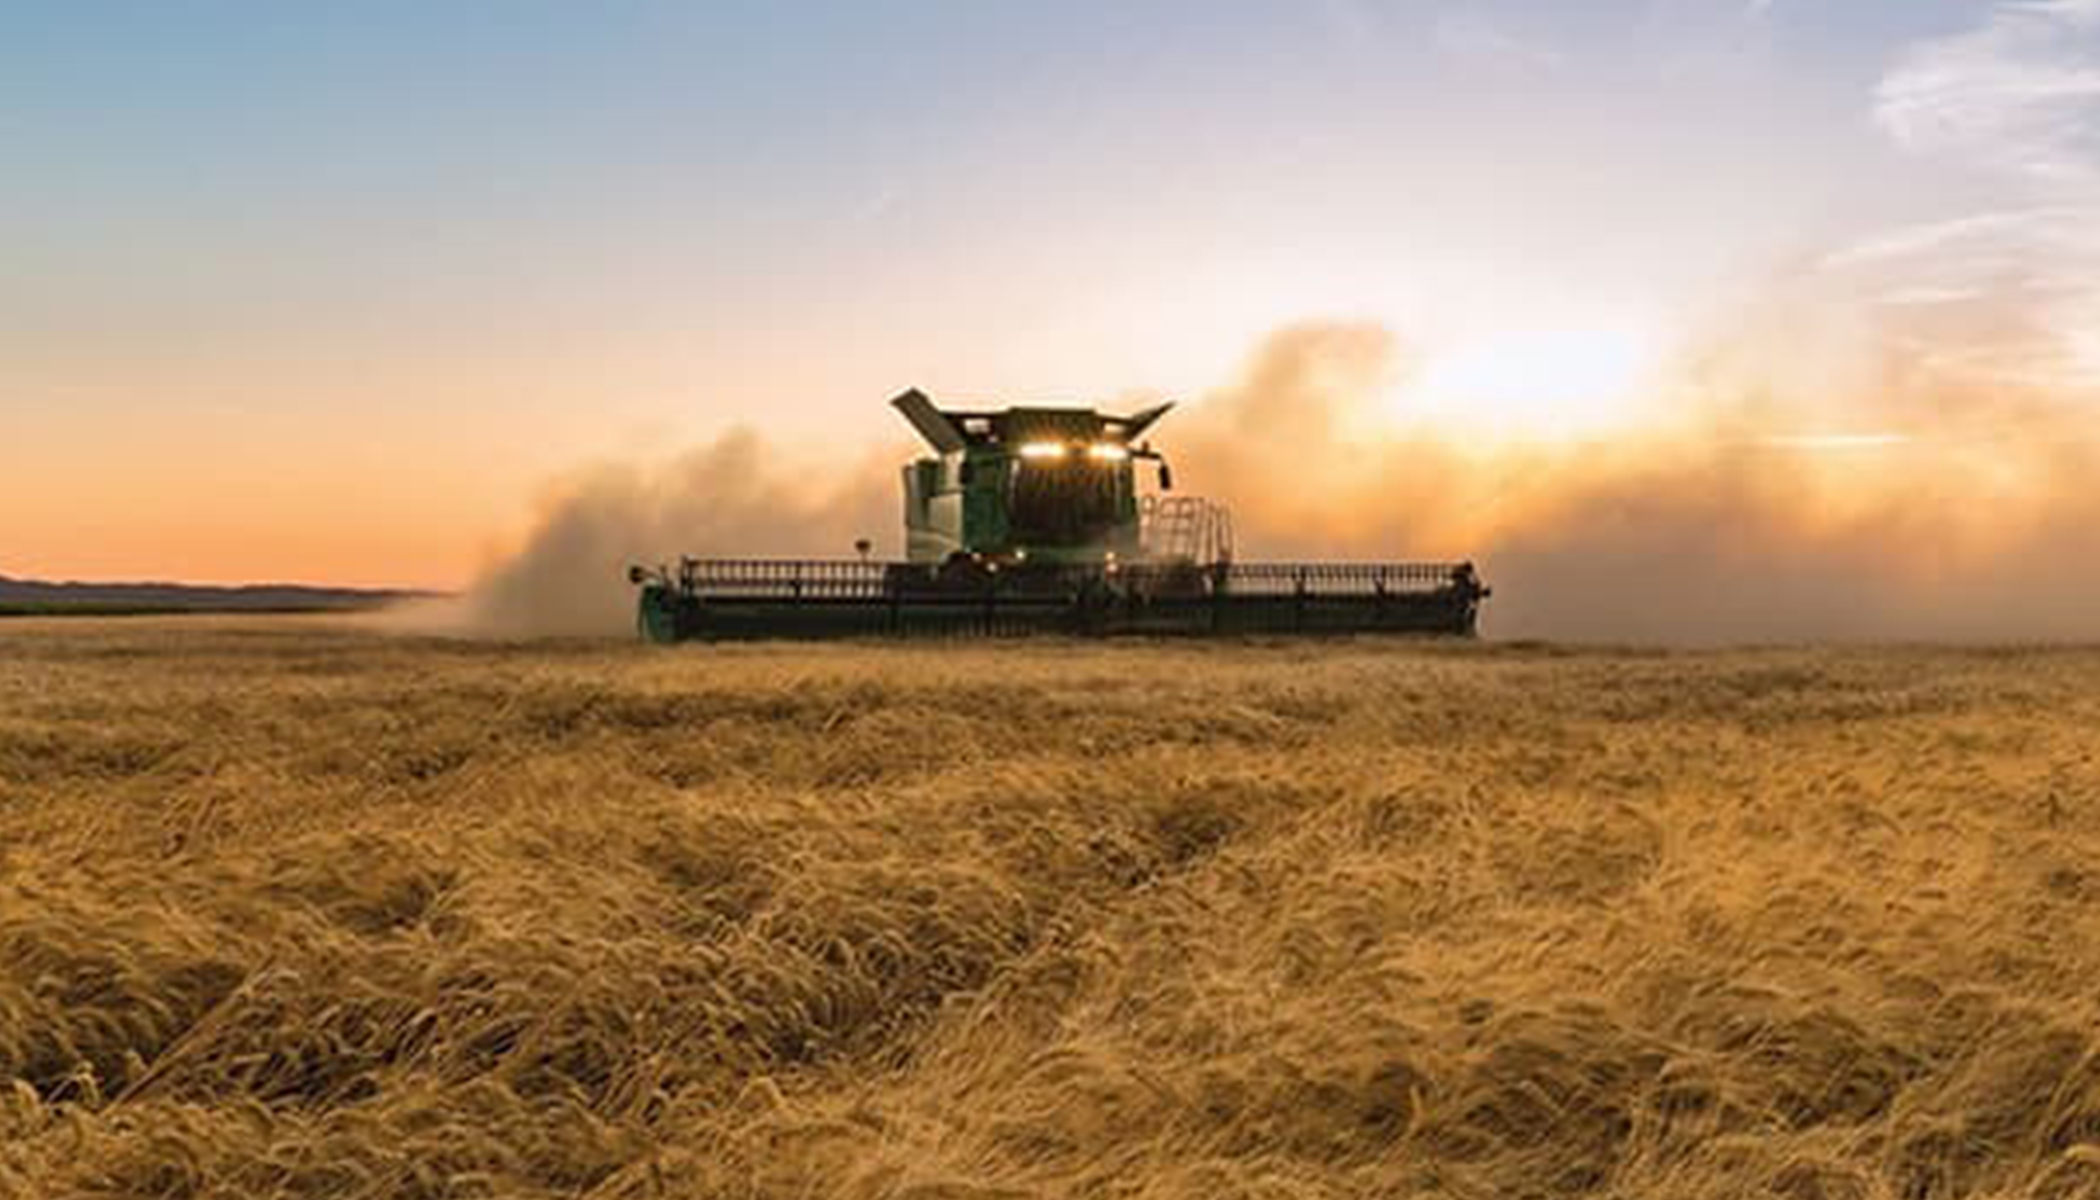 A field cultivator in a field of crops with a large dust cloud behind it